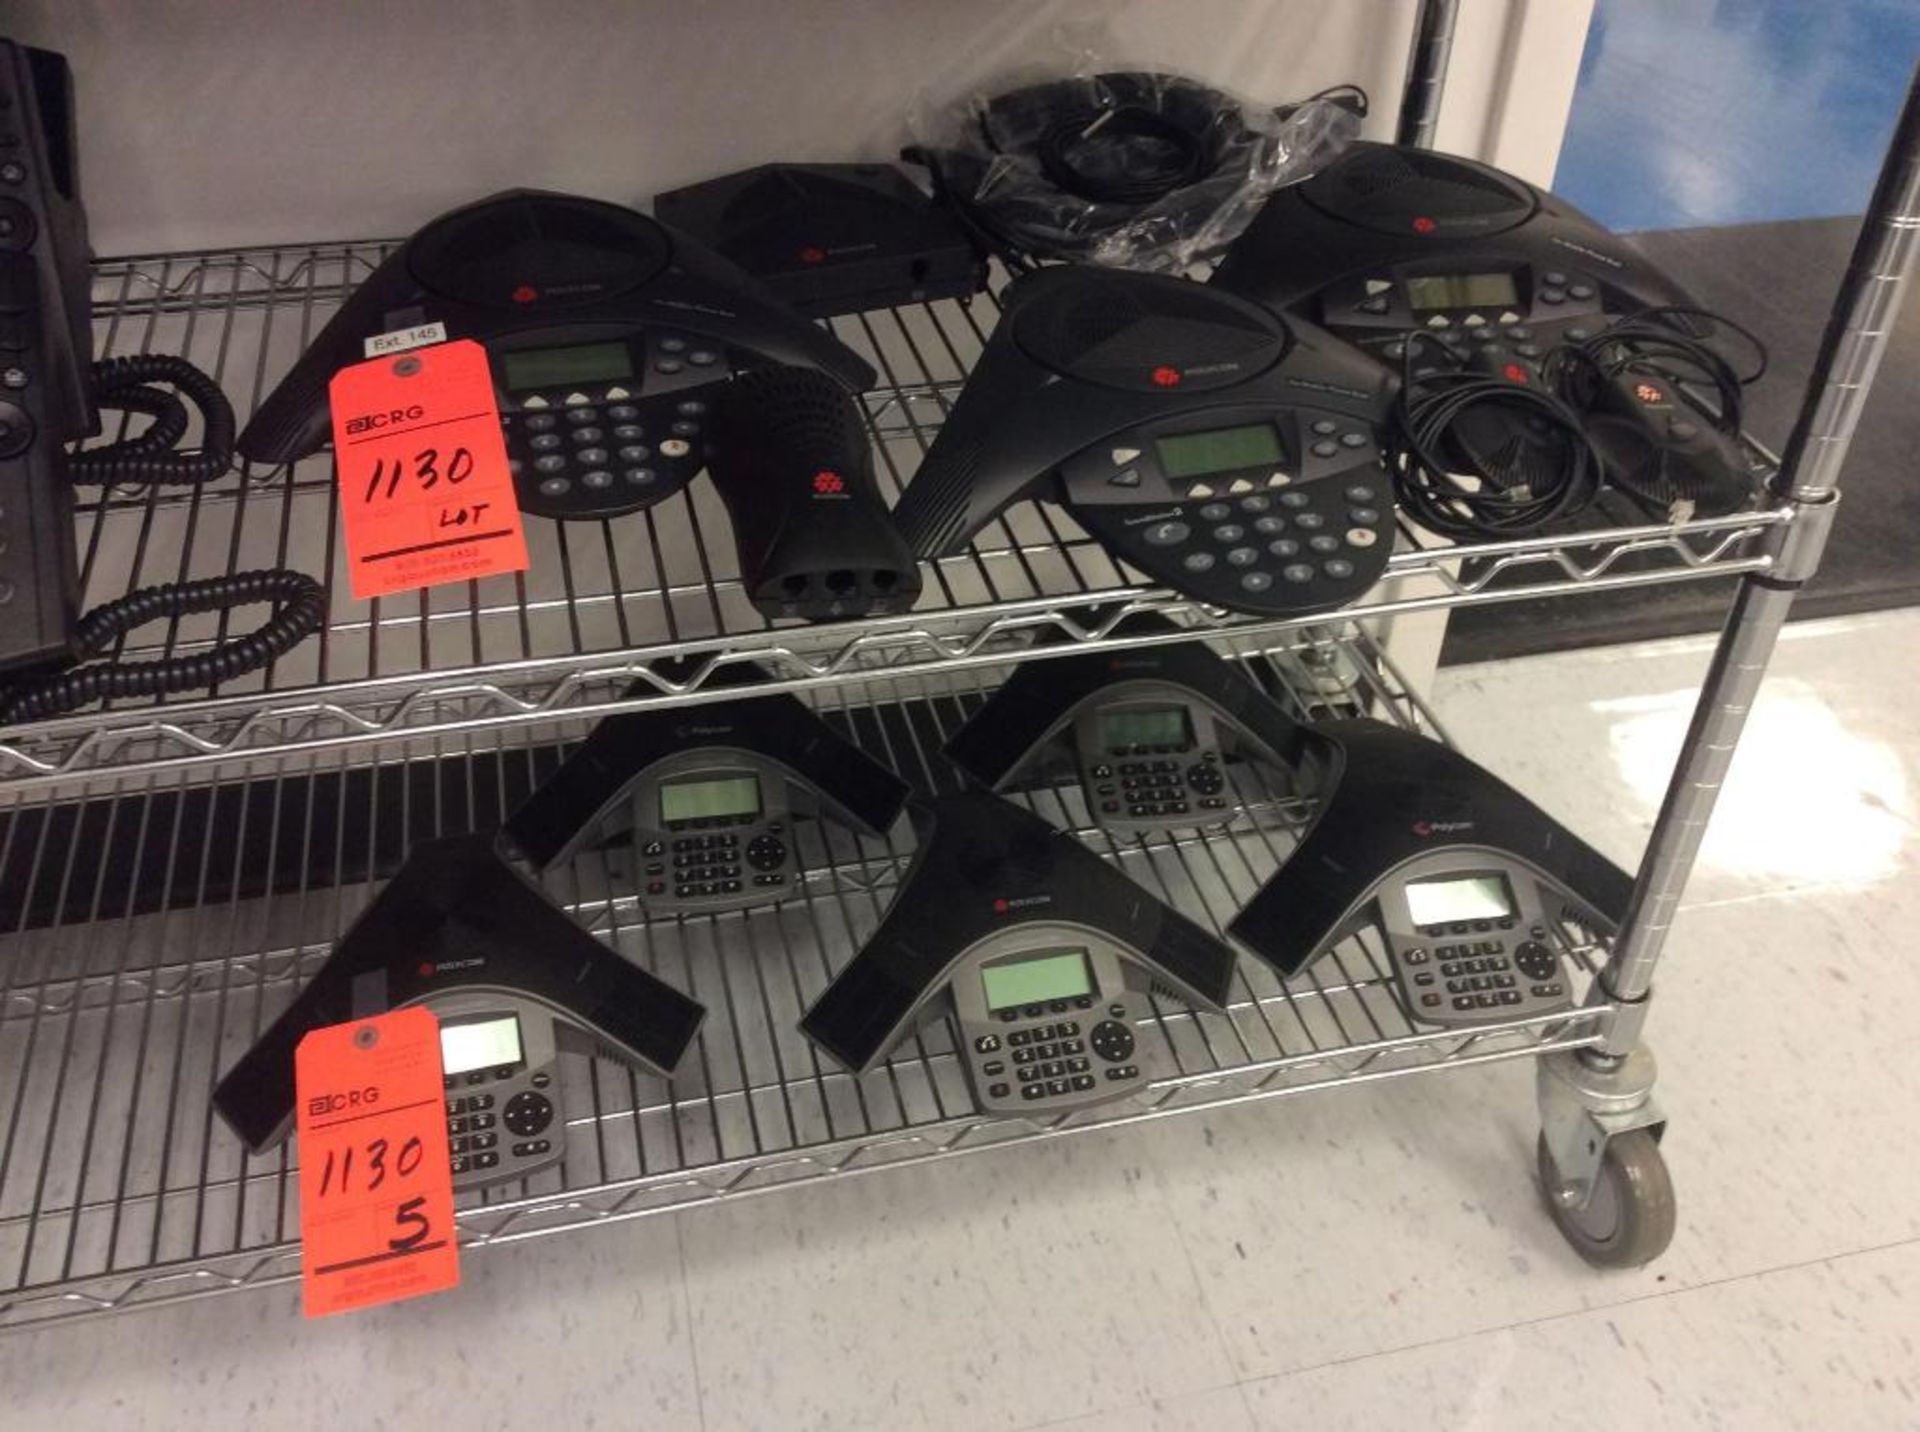 Lot of asst Polycom phone conferencing speakers and parts